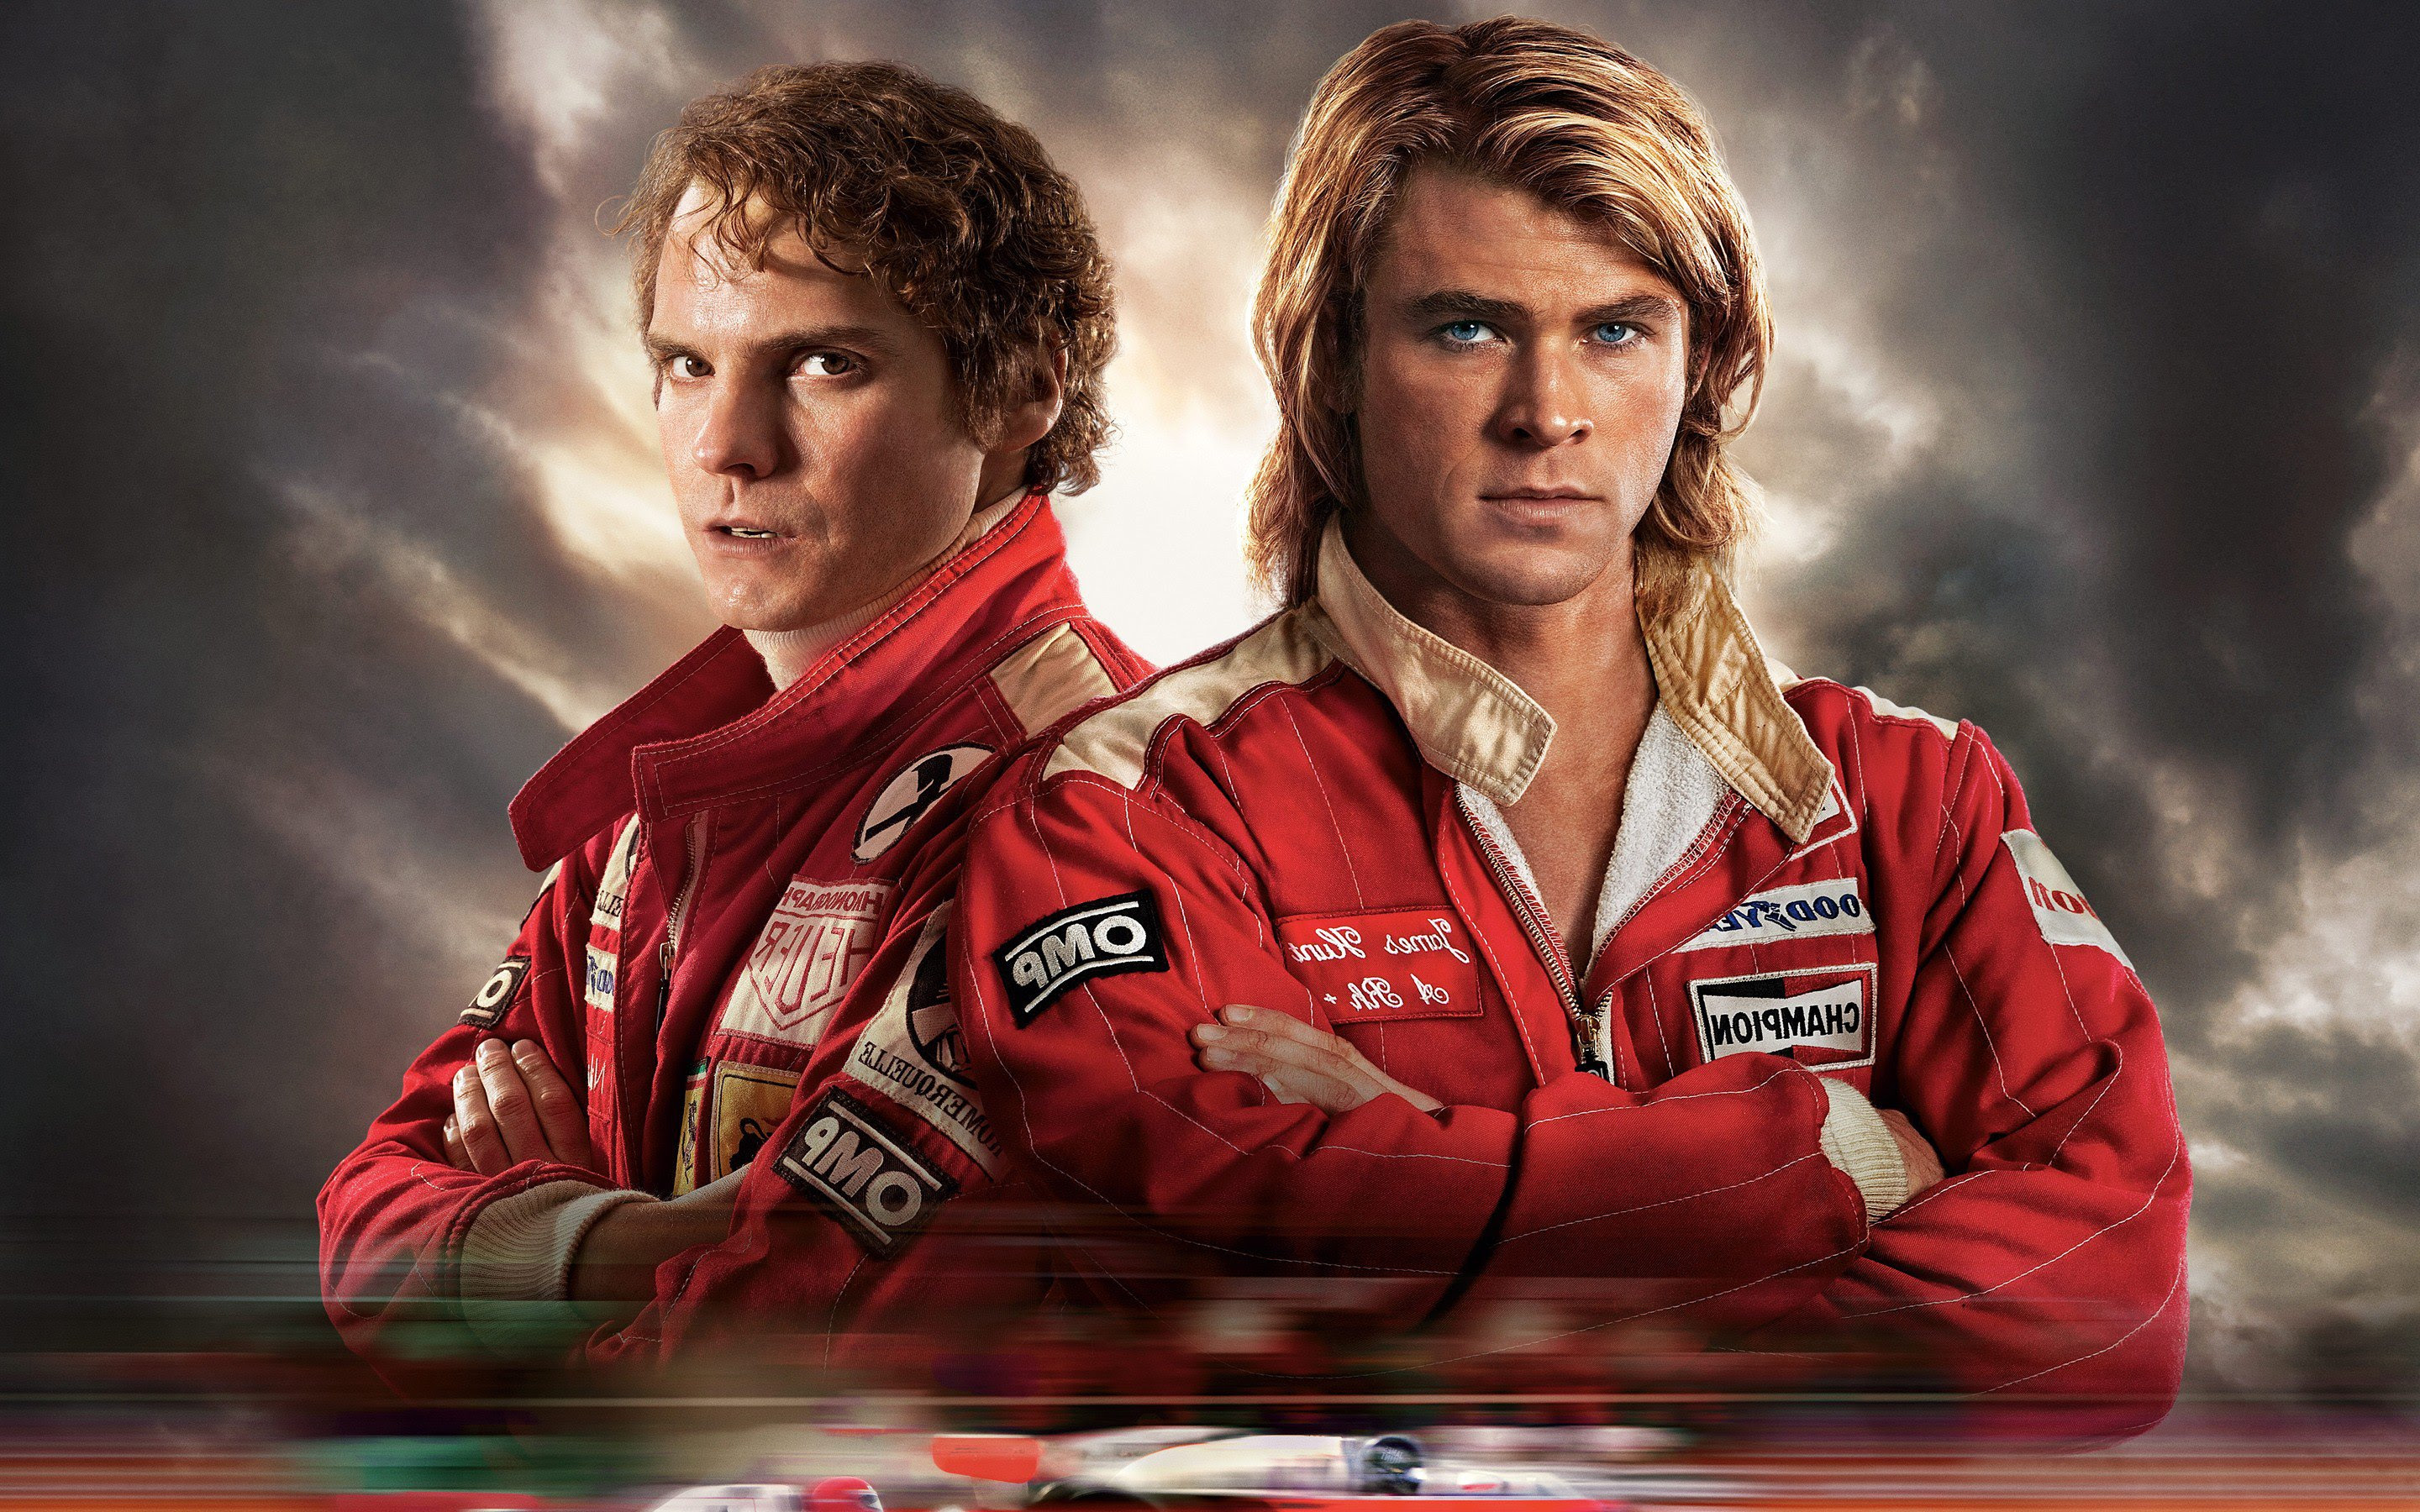 Rush Movie Wallpaper Watch Free Movies And Tv Shows Online Streaming Movies